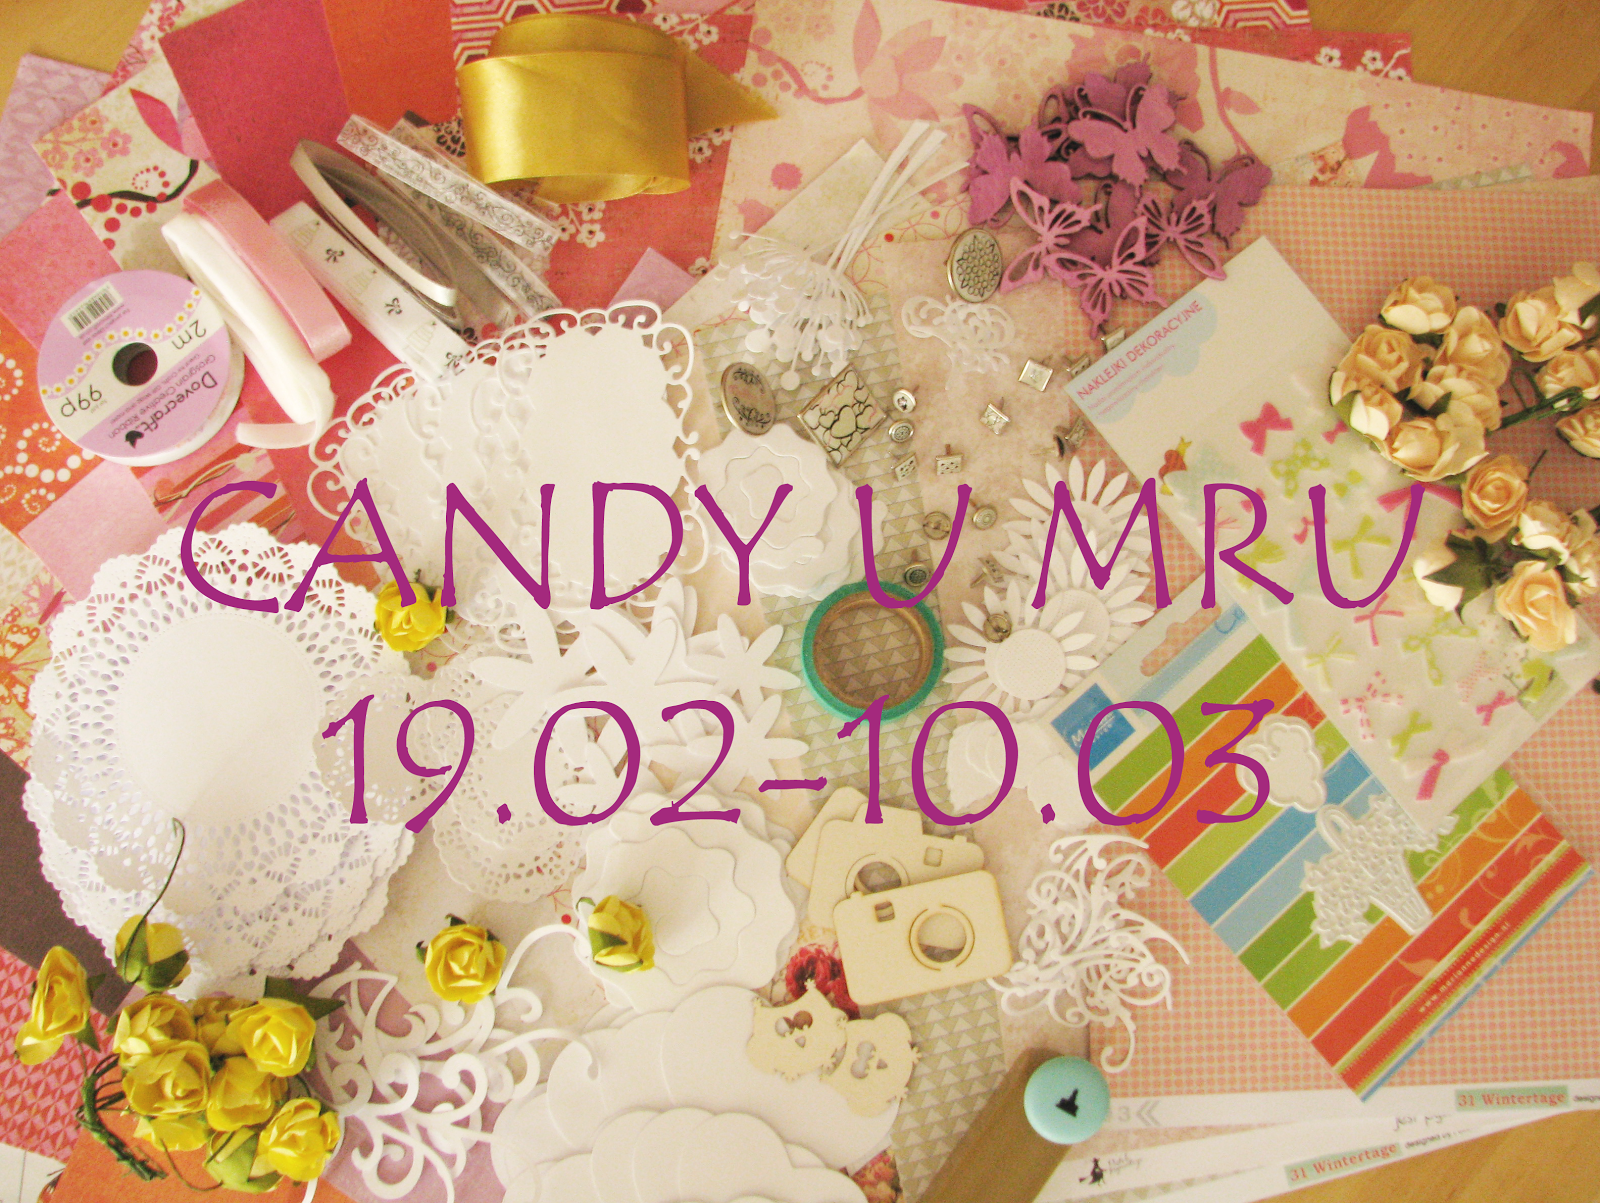 Candy do 10.03.2014